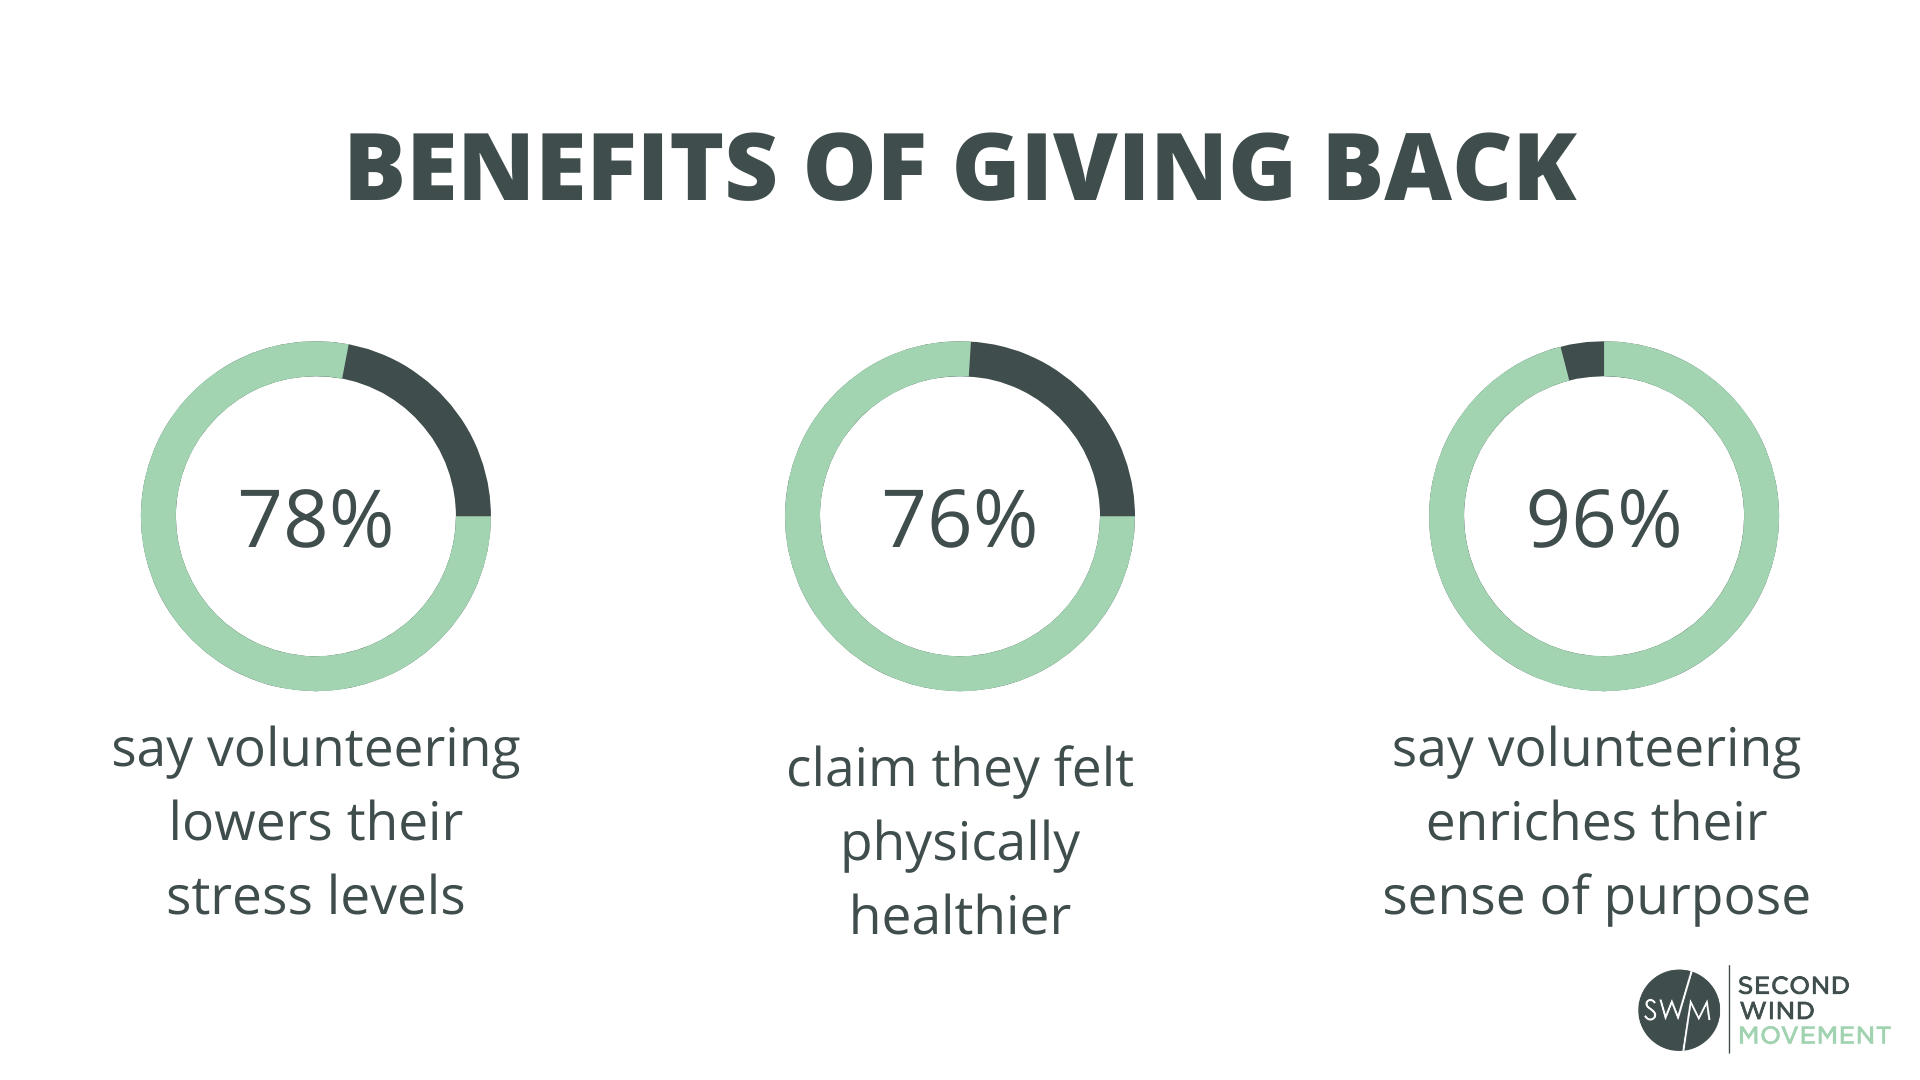 the benefits of giving back and volunteering include lower stress, better physical health, and more sense of purpose in life